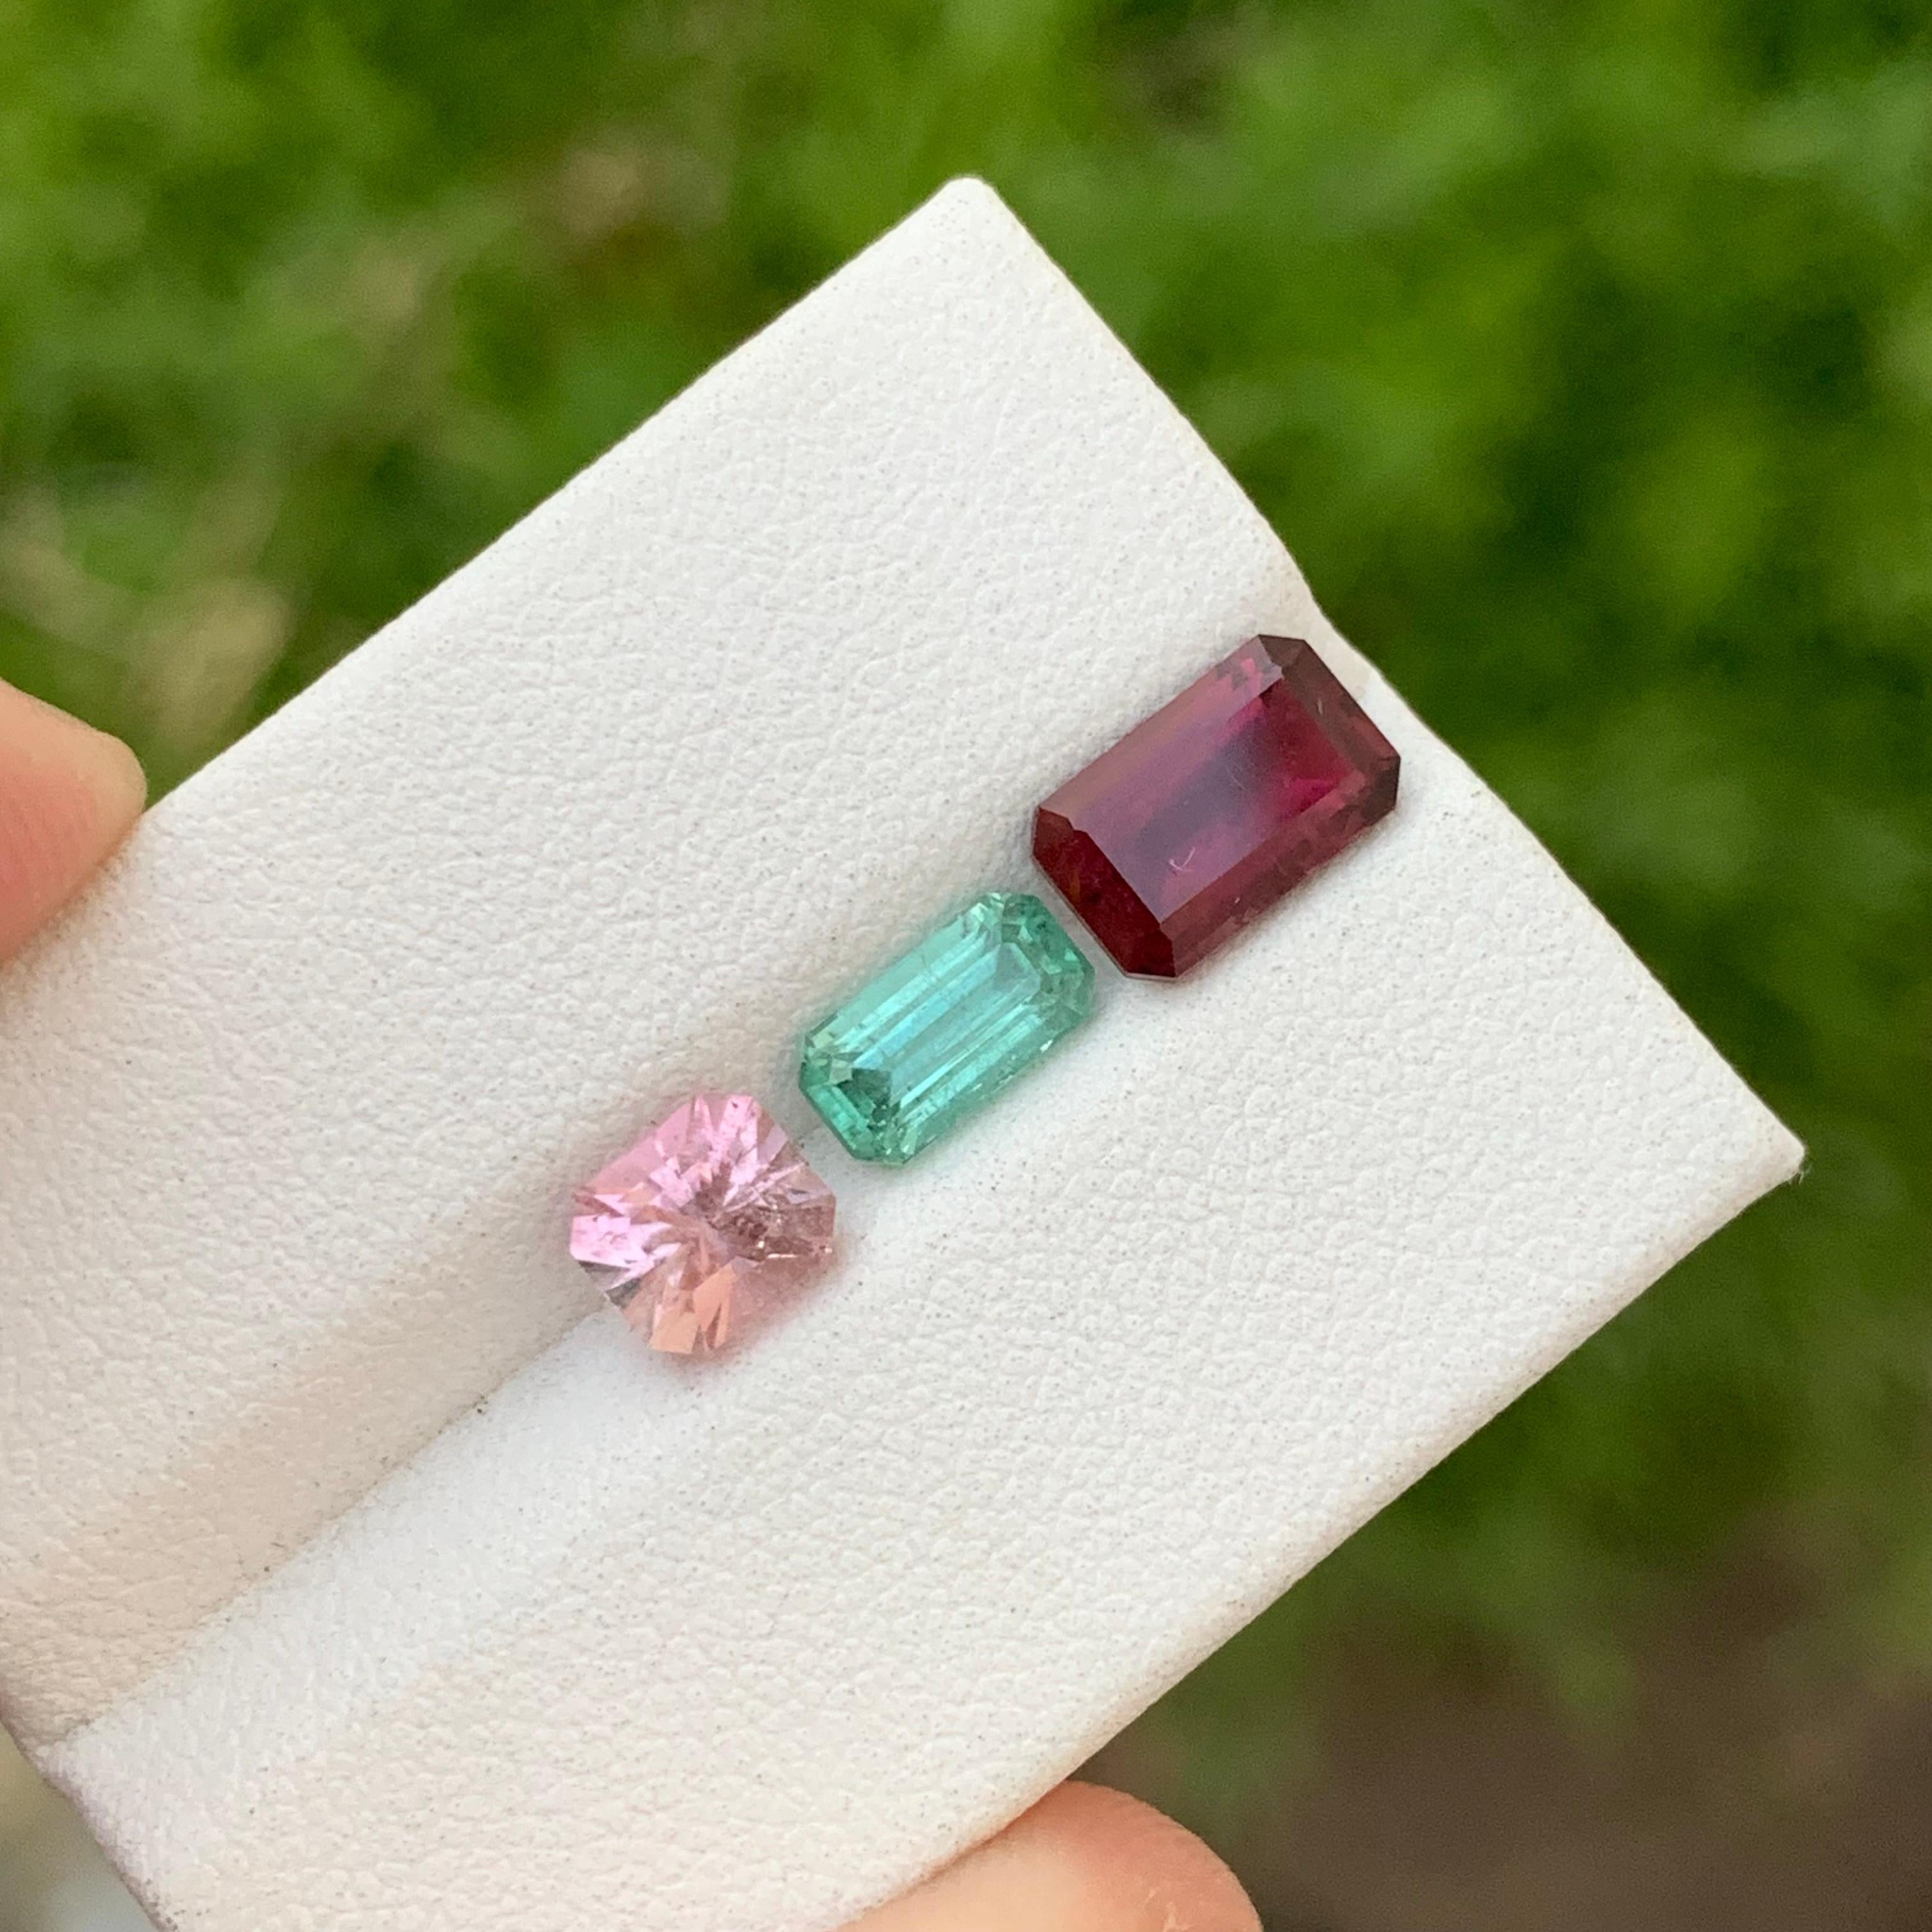 Loose Tourmaline Set 
Weight: 3.55 Carats
Sizes: 0.90 to 1.65 Carat 
Origin: Afghanistan
Certificate: On Demand
Treatment: Non

Tourmaline is a captivating gemstone known for its remarkable variety of colors, making it a favorite among gemstone